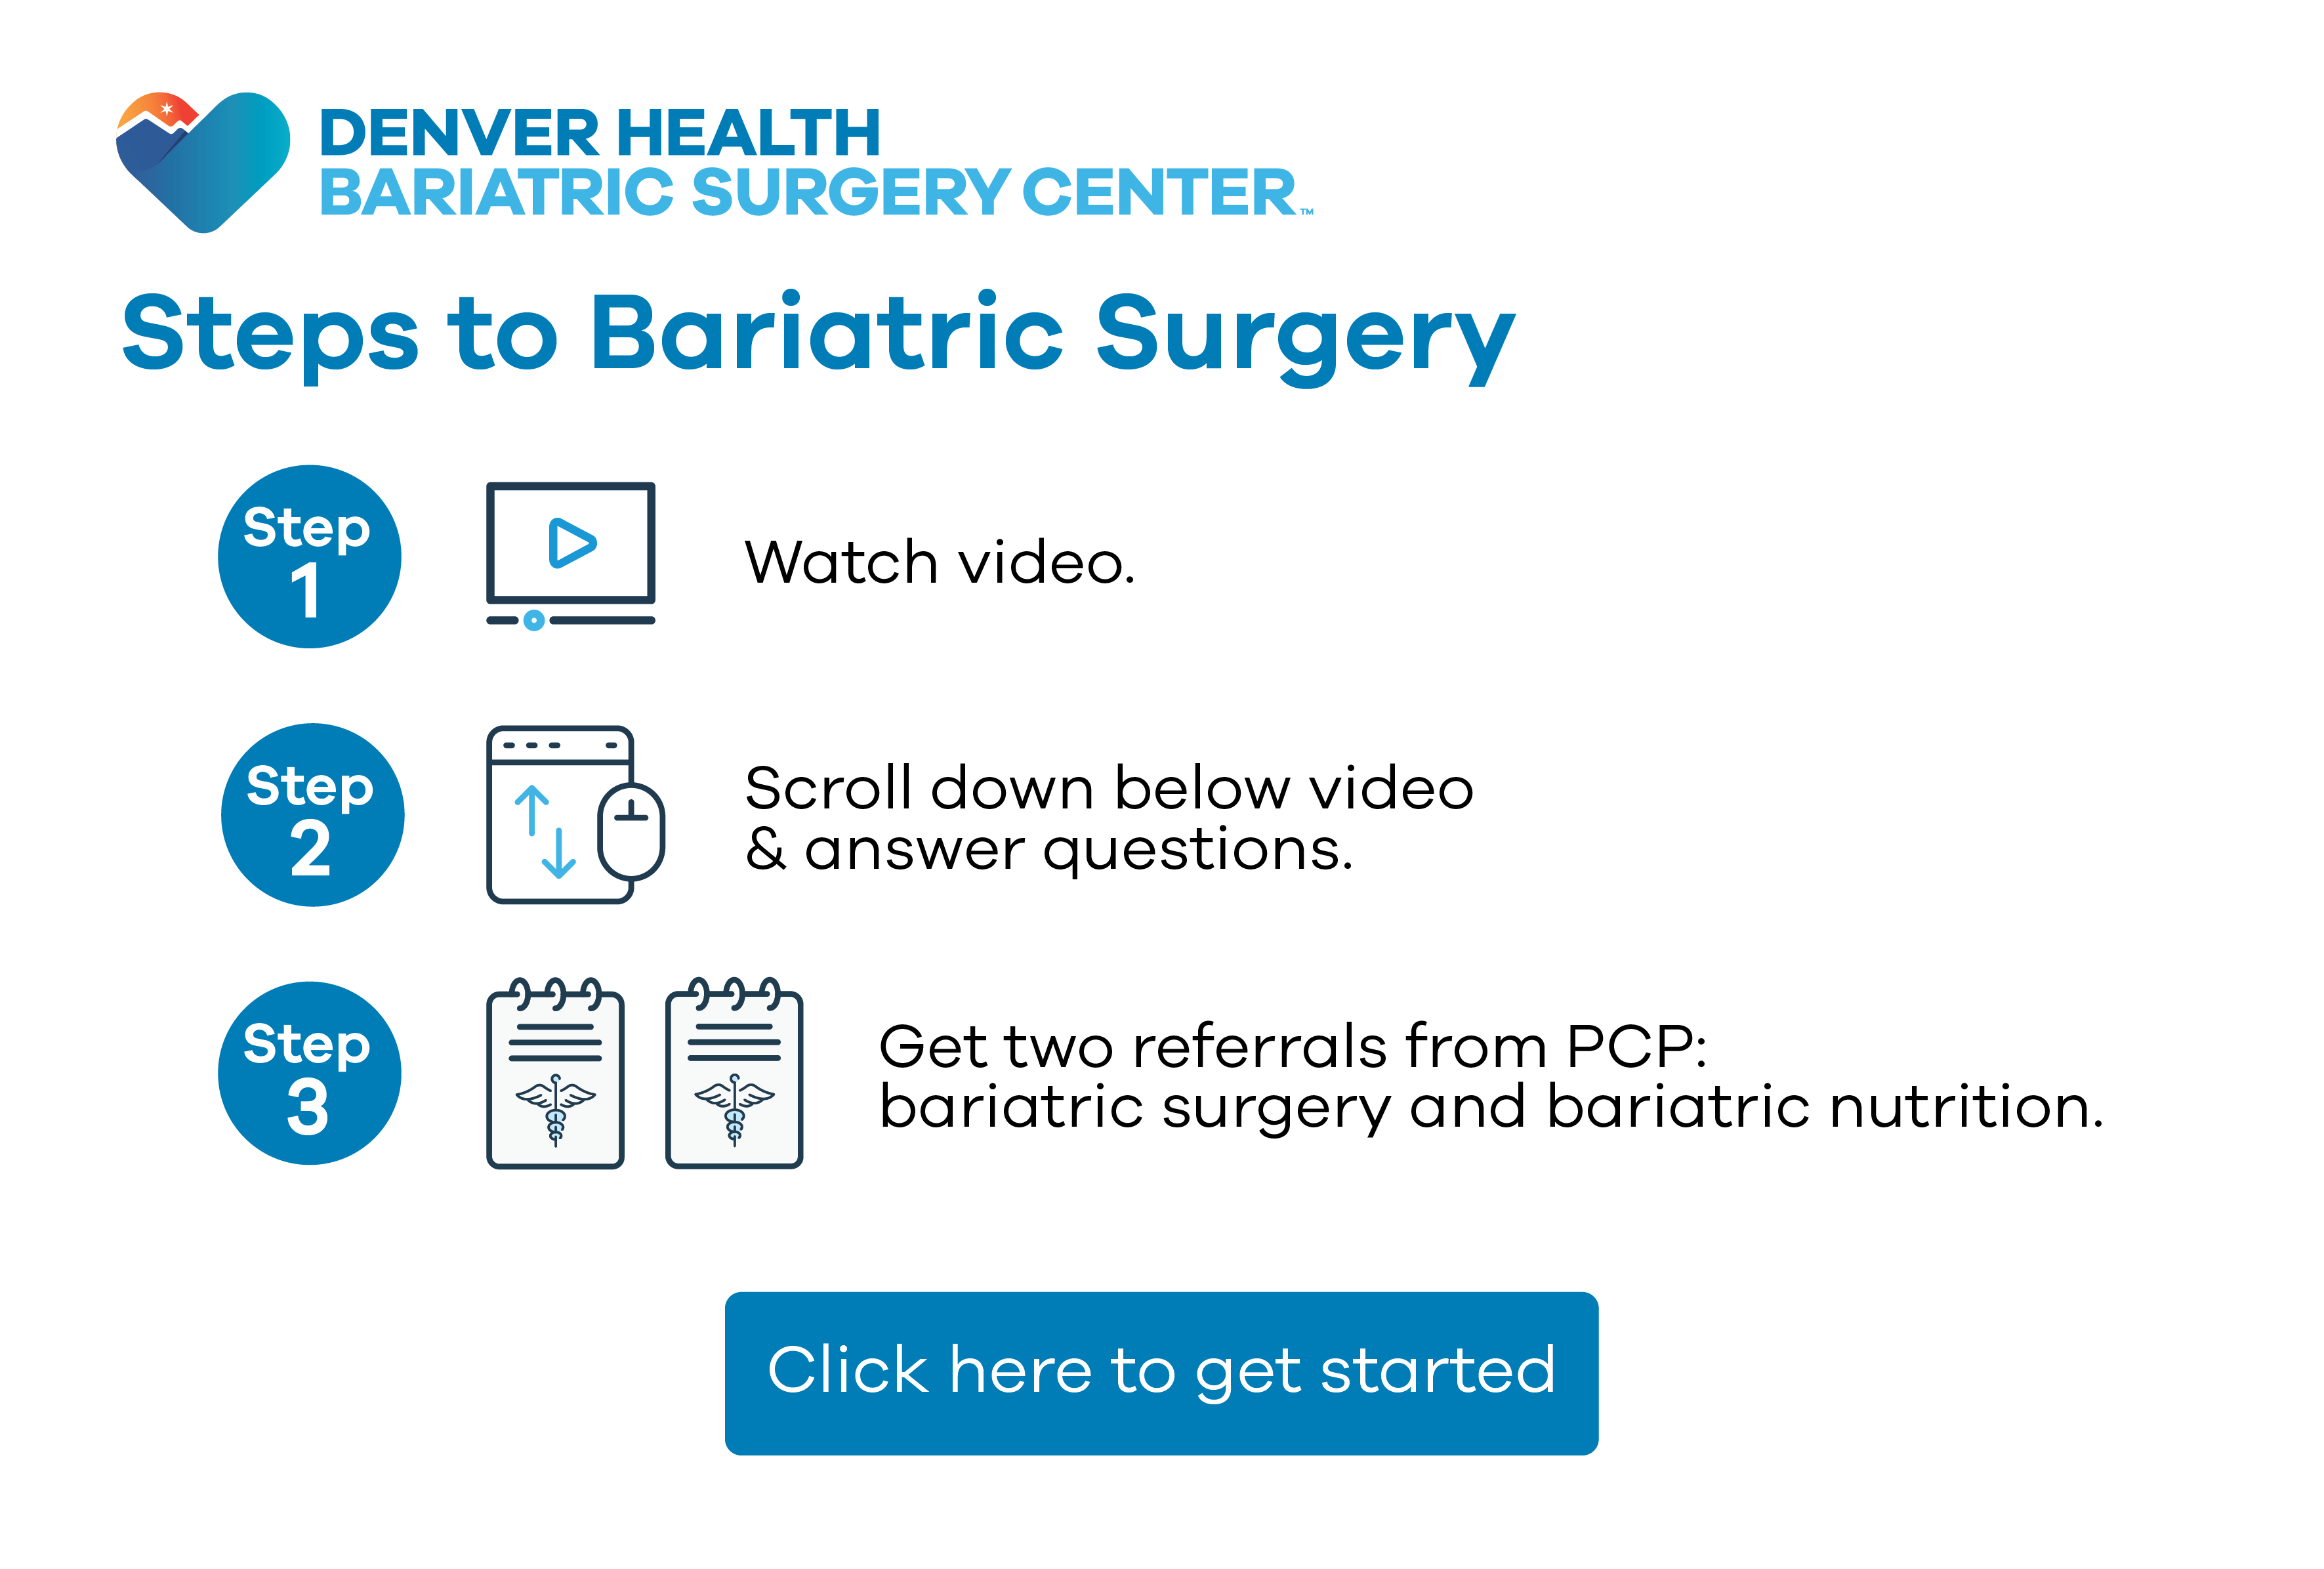 Steps to Bariatric Surgery